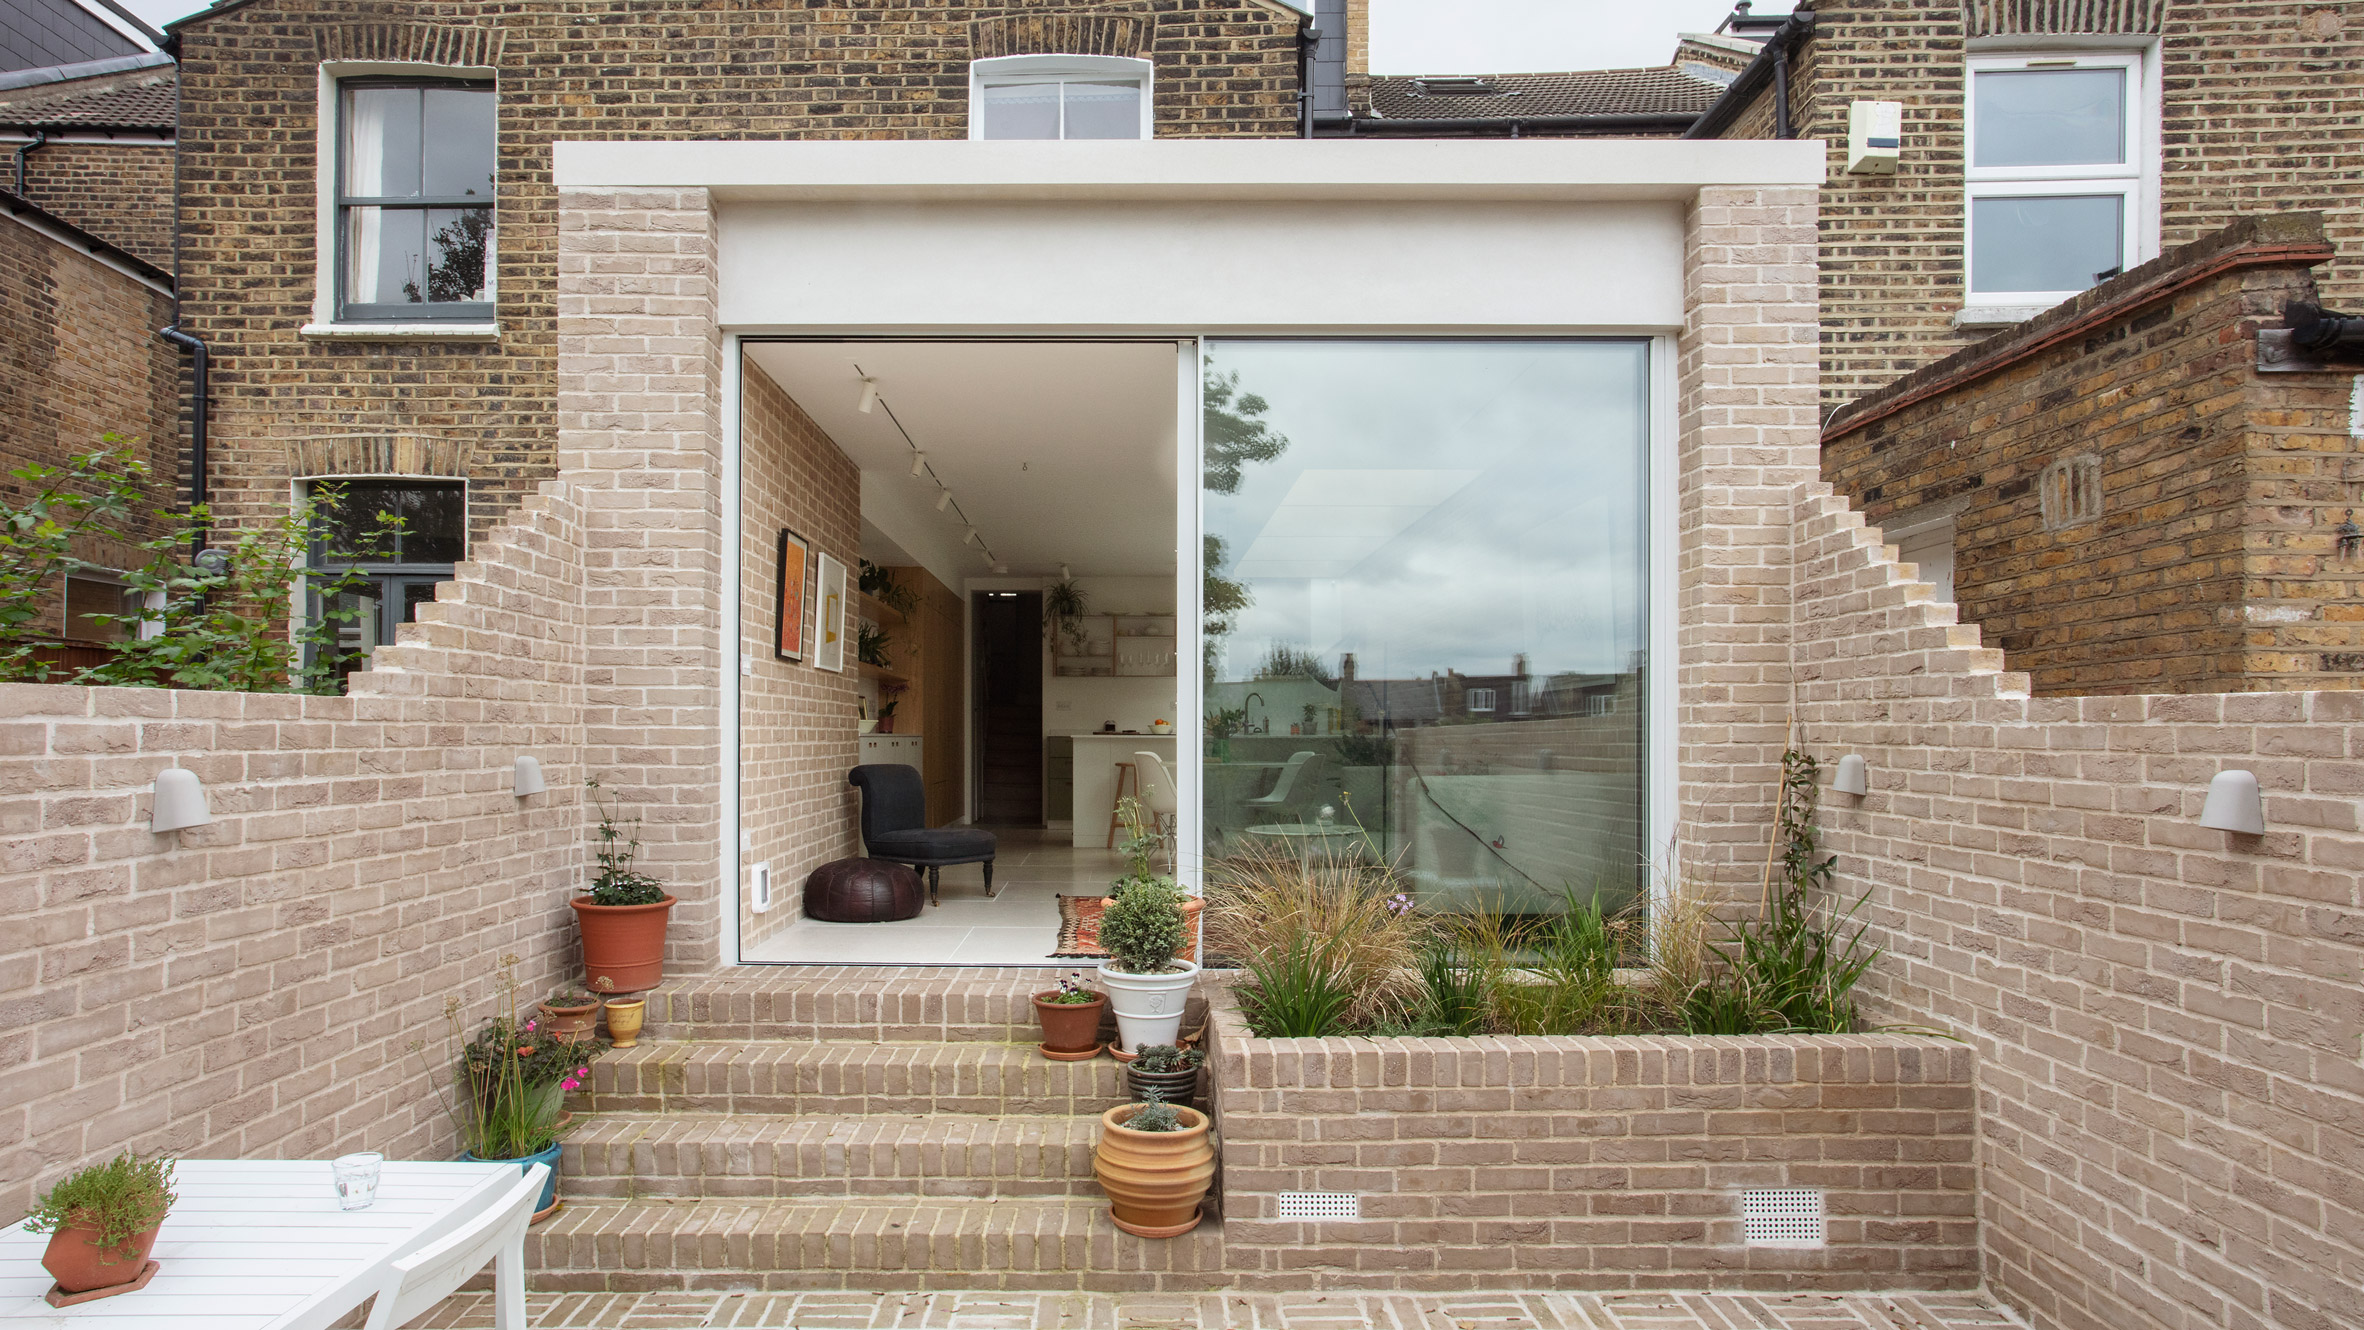 London Extension and Gallery is a residential extension in South London by Delve Architects